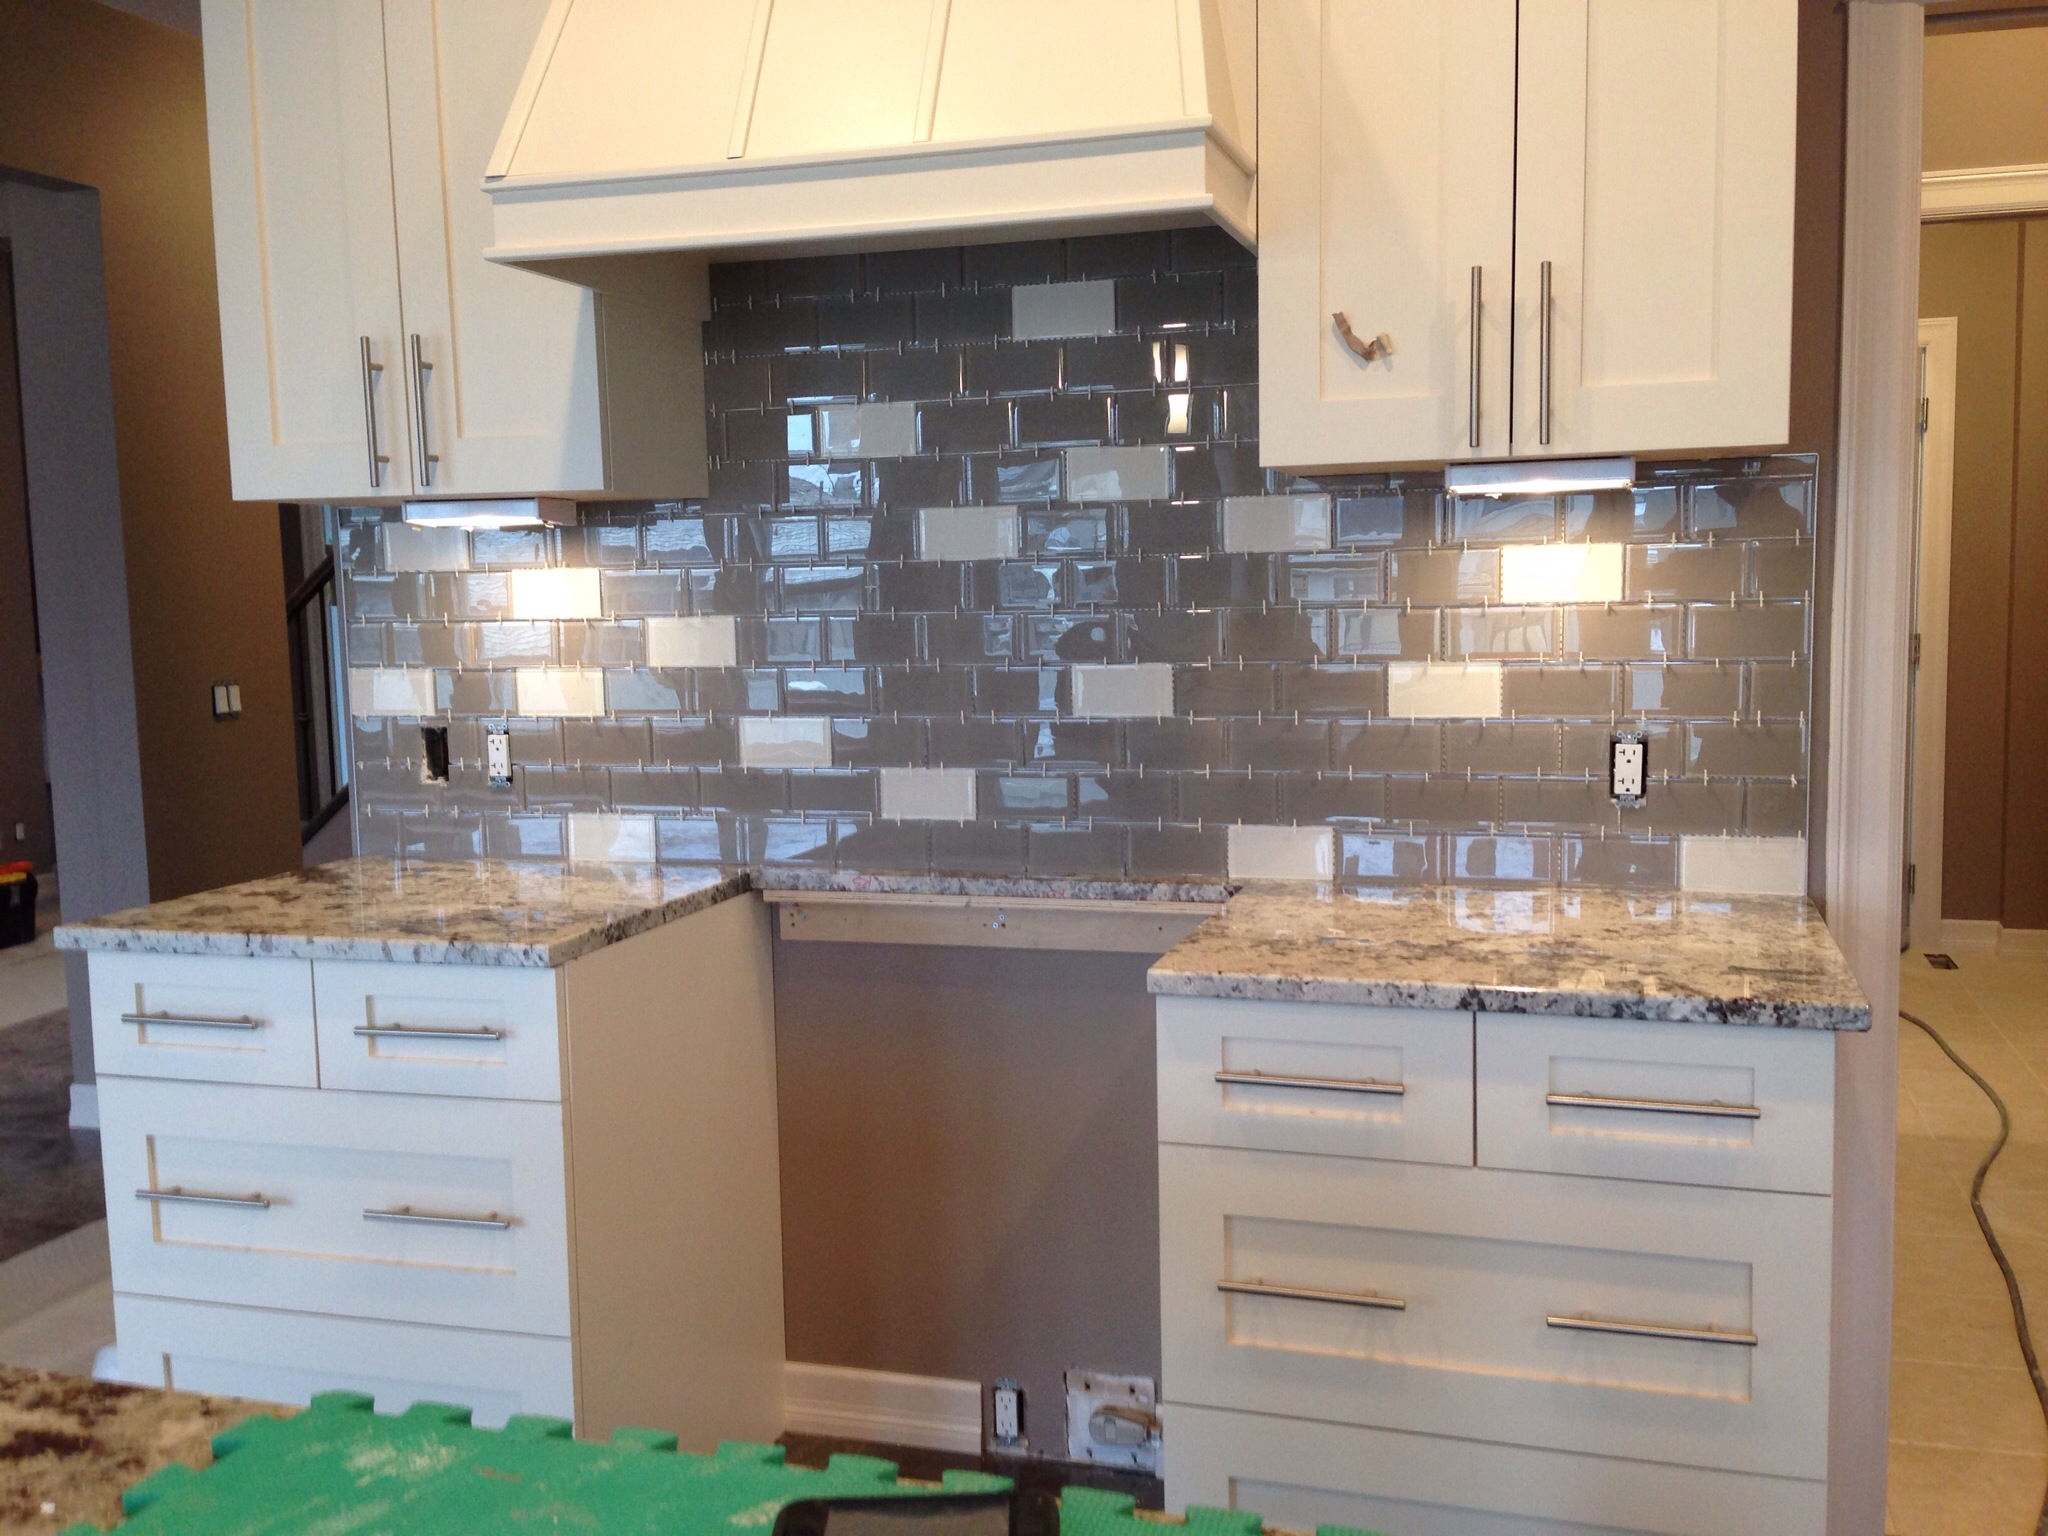 Backsplash The Tile Installations Specialists,Best Places To Travel In December 2020 In The Us